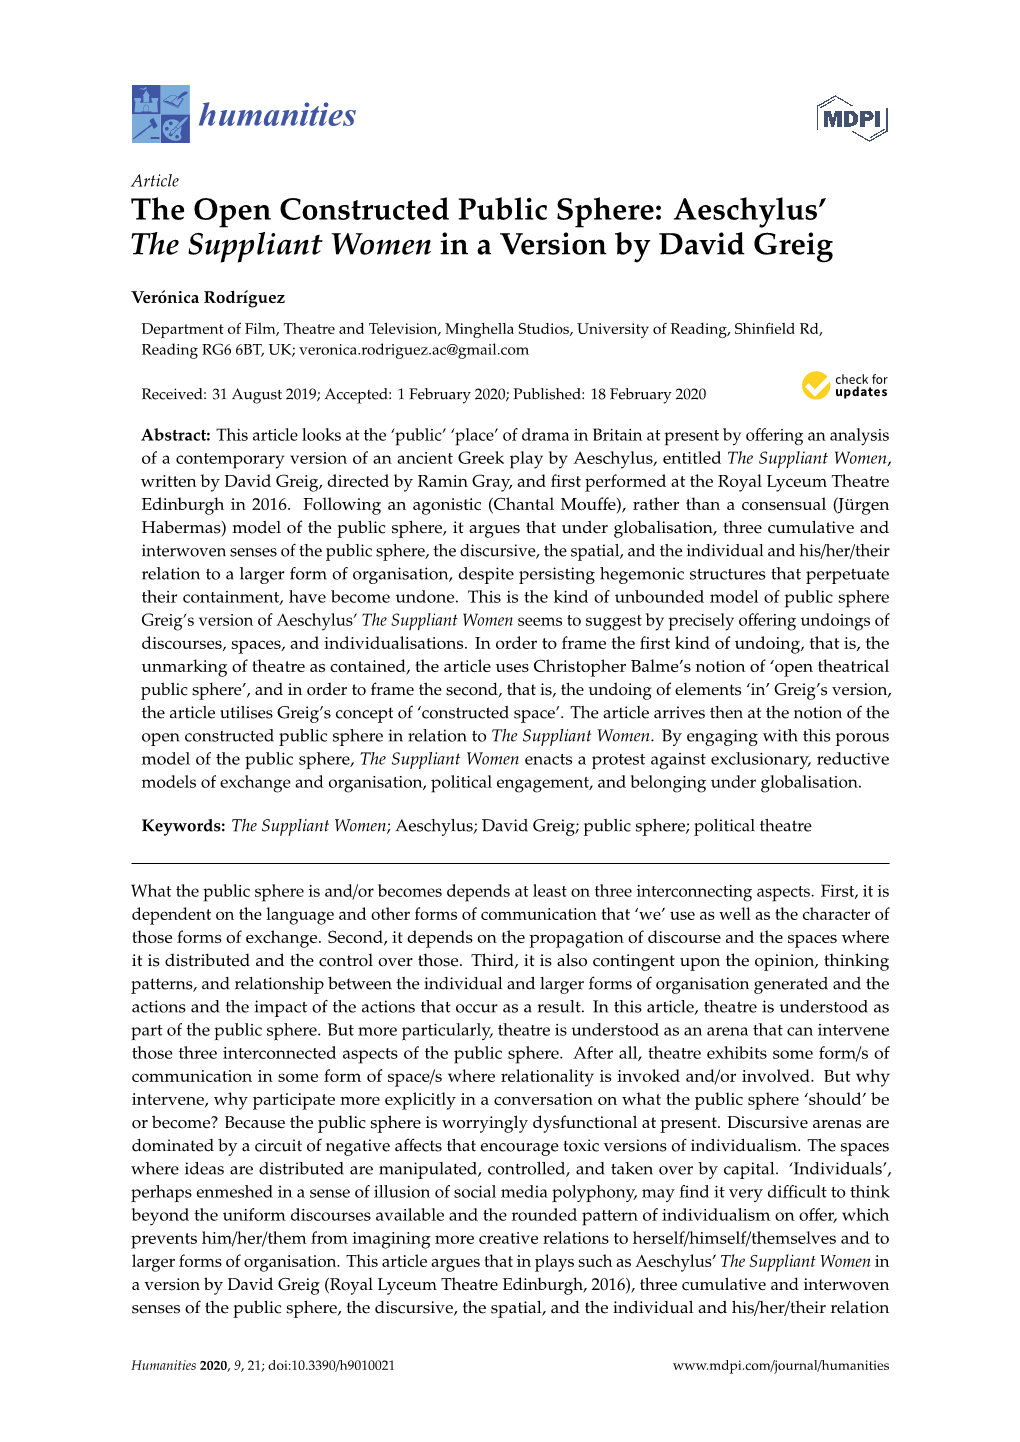 The Open Constructed Public Sphere: Aeschylus' the Suppliant Women in a Version by David Greig